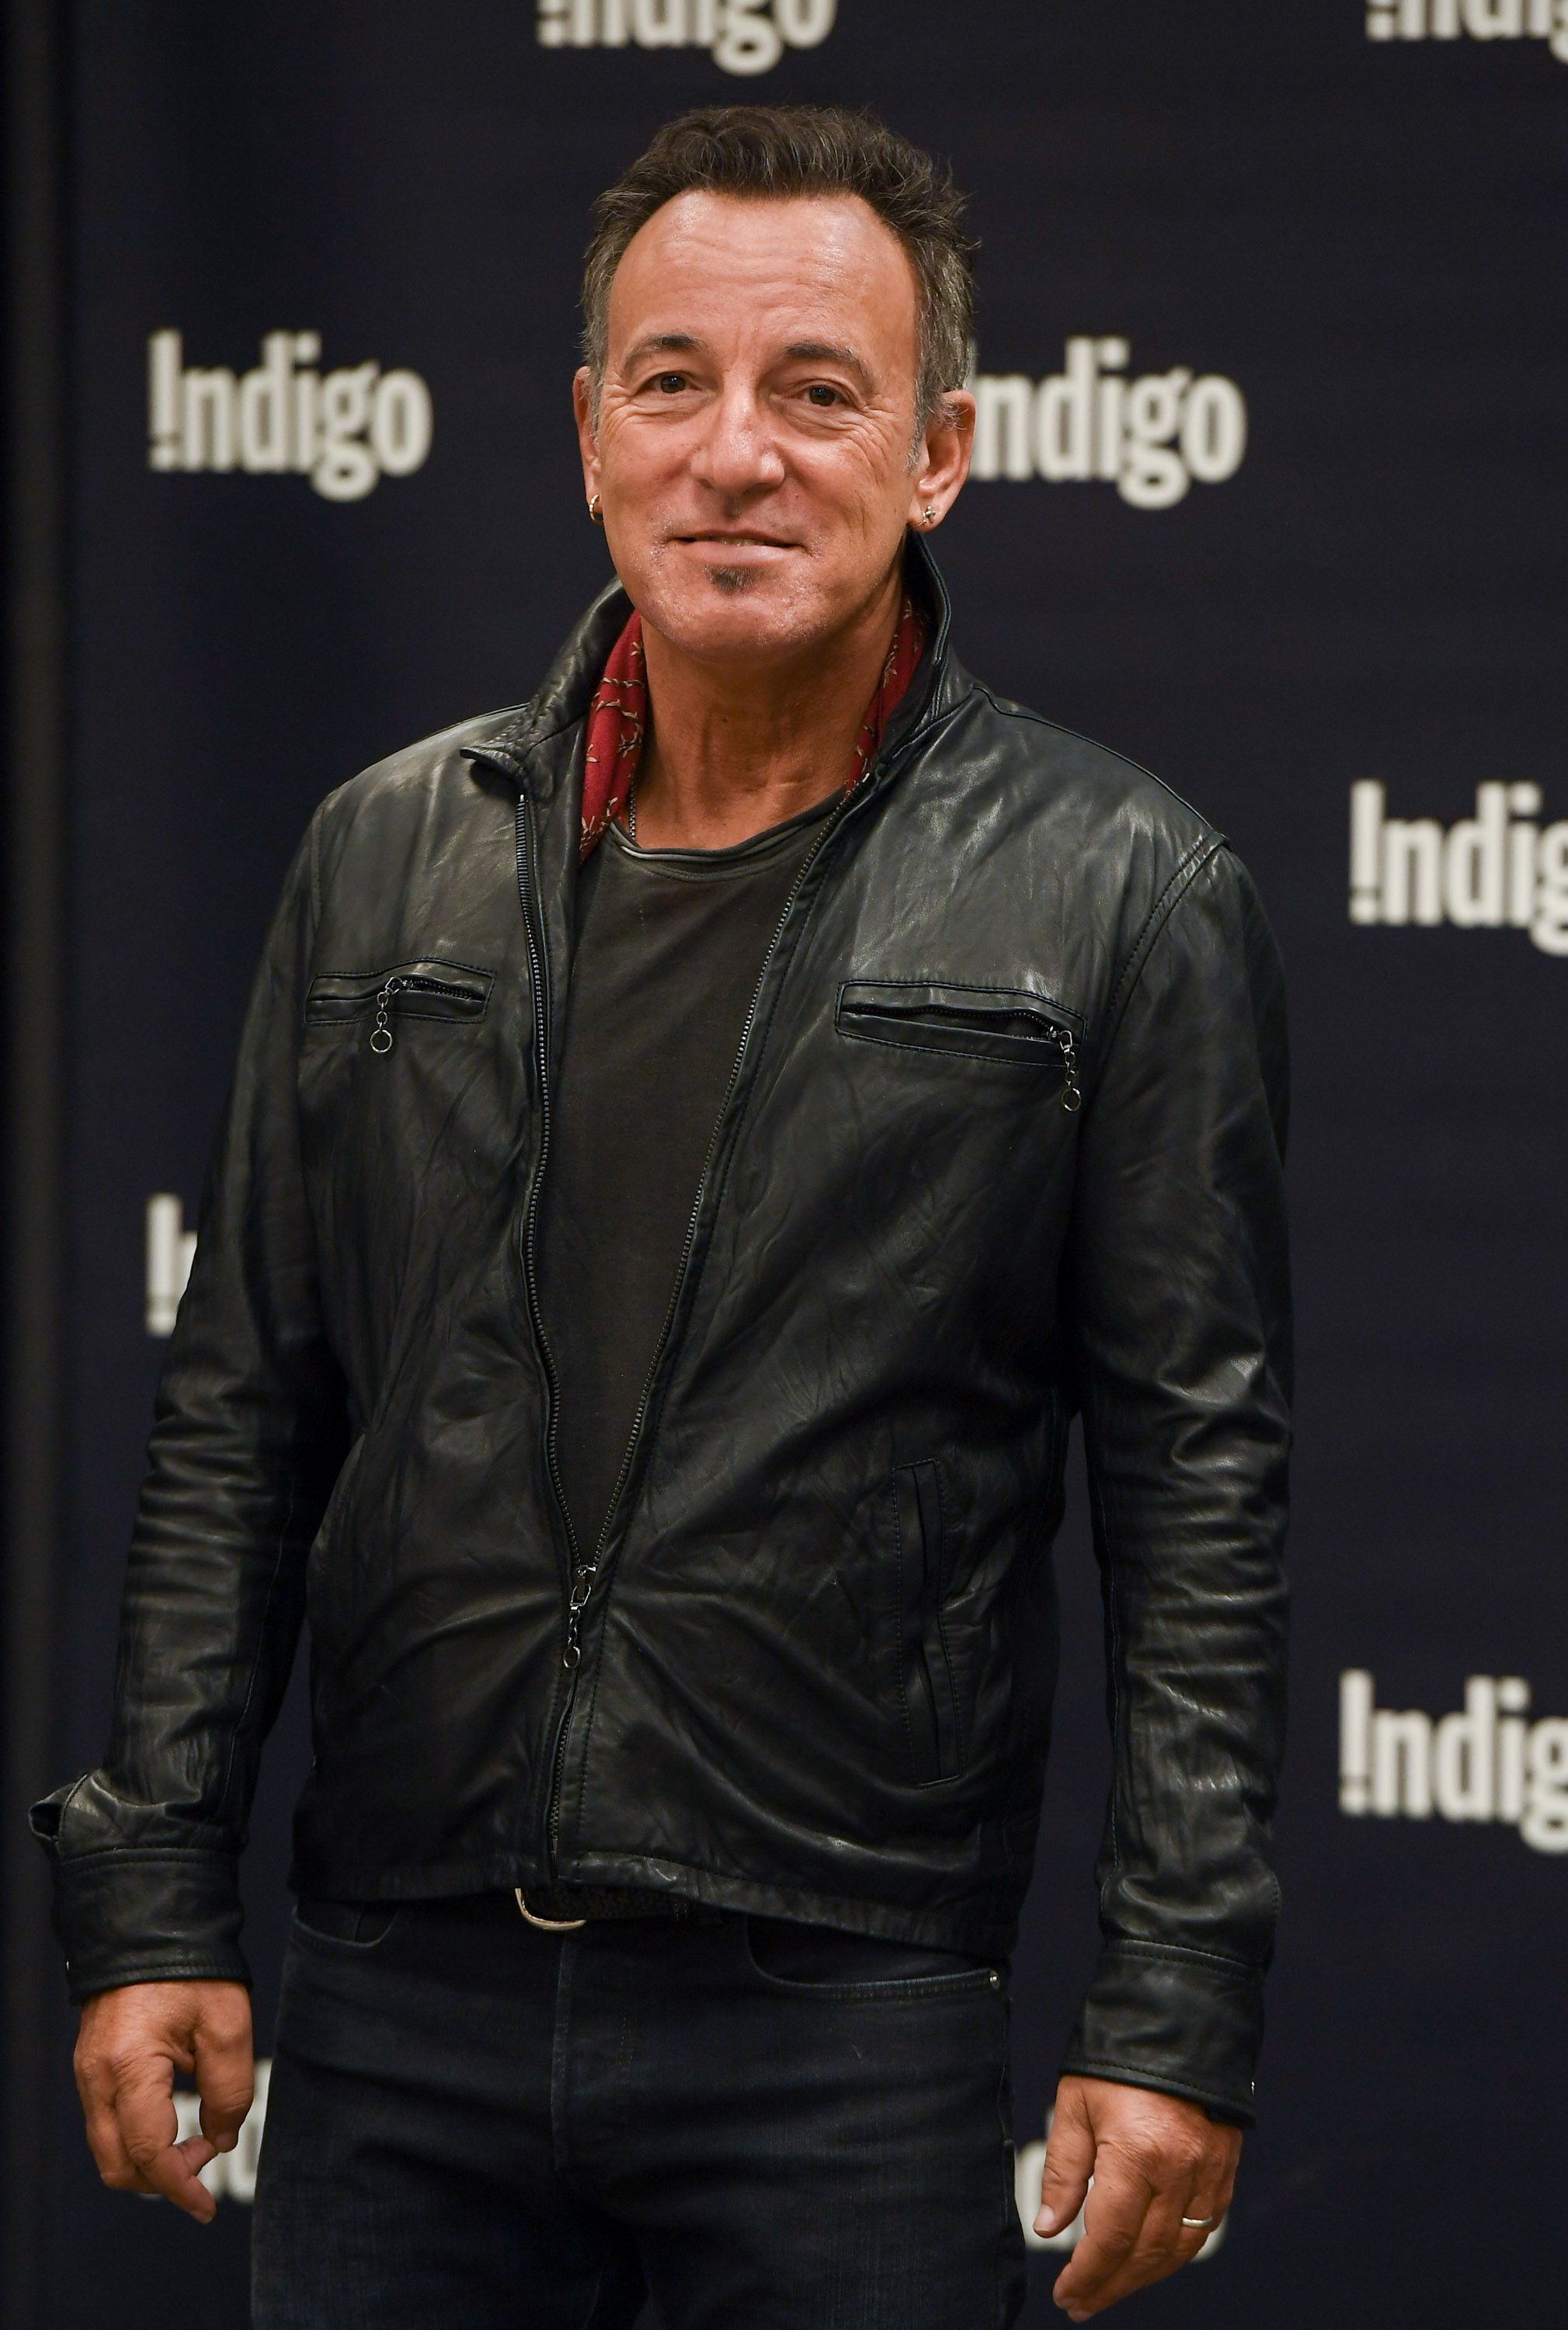 Bruce Springsteen at a book signing of "Born To Run" at Indigo Manulife Centre on October 27, 2016, in Toronto, Canada | Photo: George Pimentel/WireImage/Getty Images